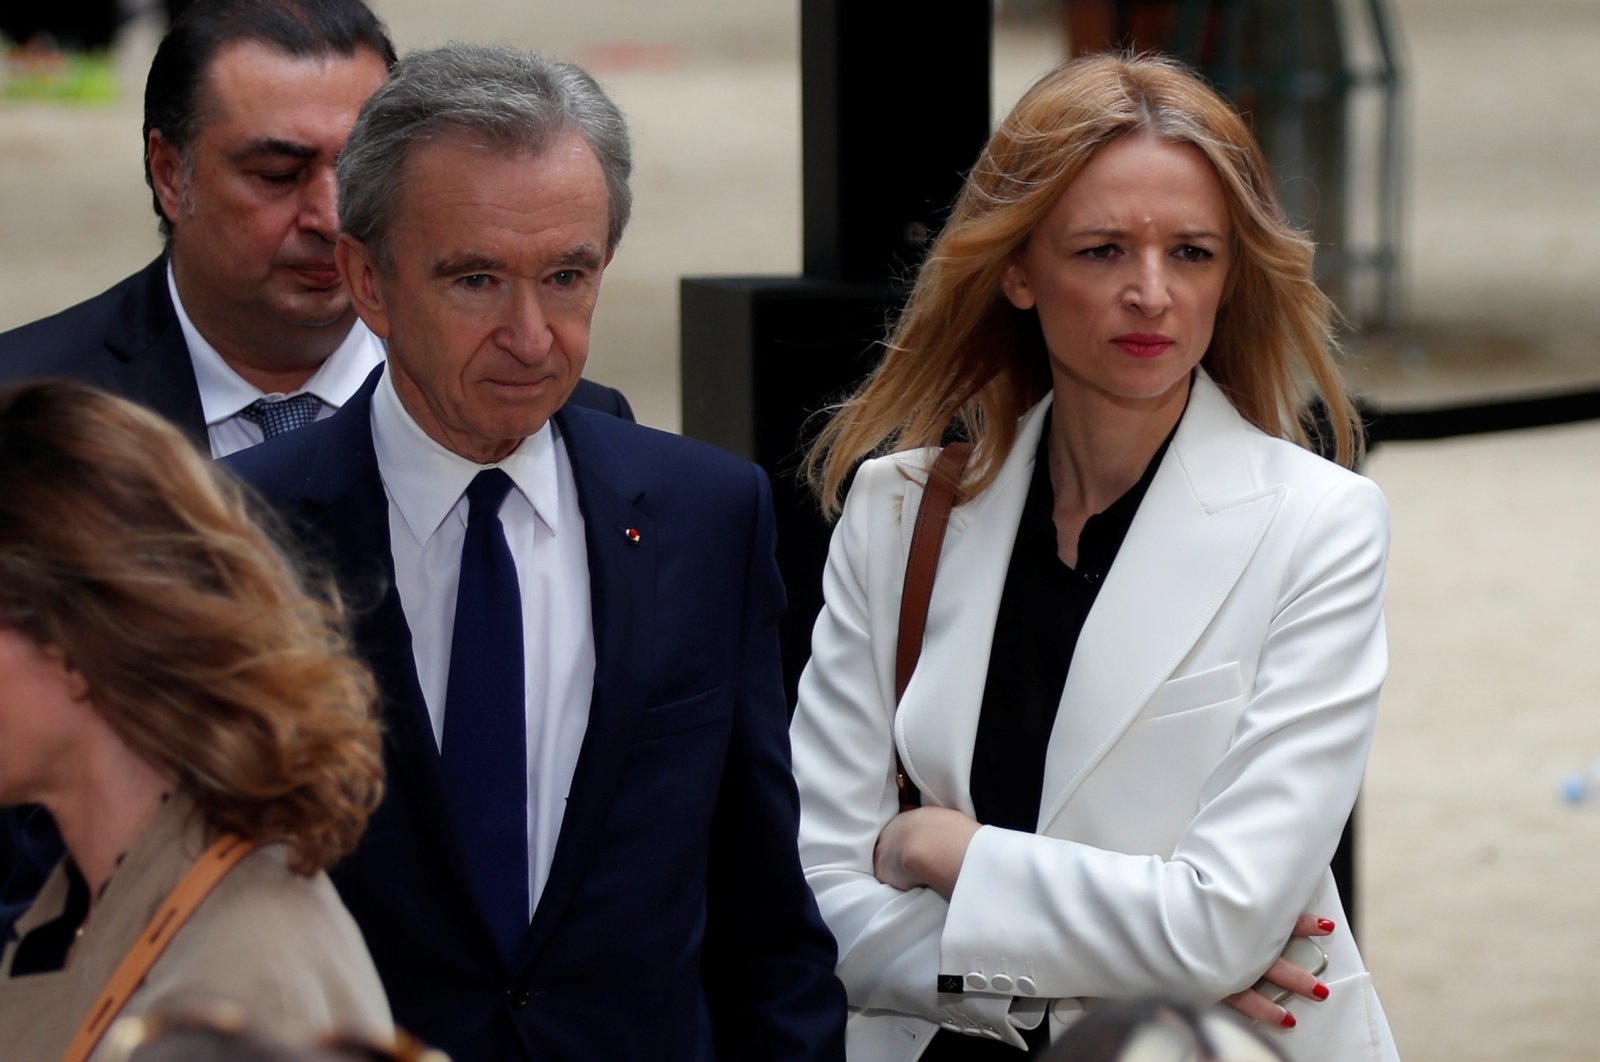 Bernard Arnault (L), CEO of LVMH Moet Hennessy Louis Vuitton SE, and Delphine Arnault (R), Executive Vice President of Louis Vuitton, leave after the Spring/Summer 2020 collection show for fashion house Louis Vuitton during Men&#039;s Fashion Week in Paris, France, June 20, 2019. (Reuters Photo)